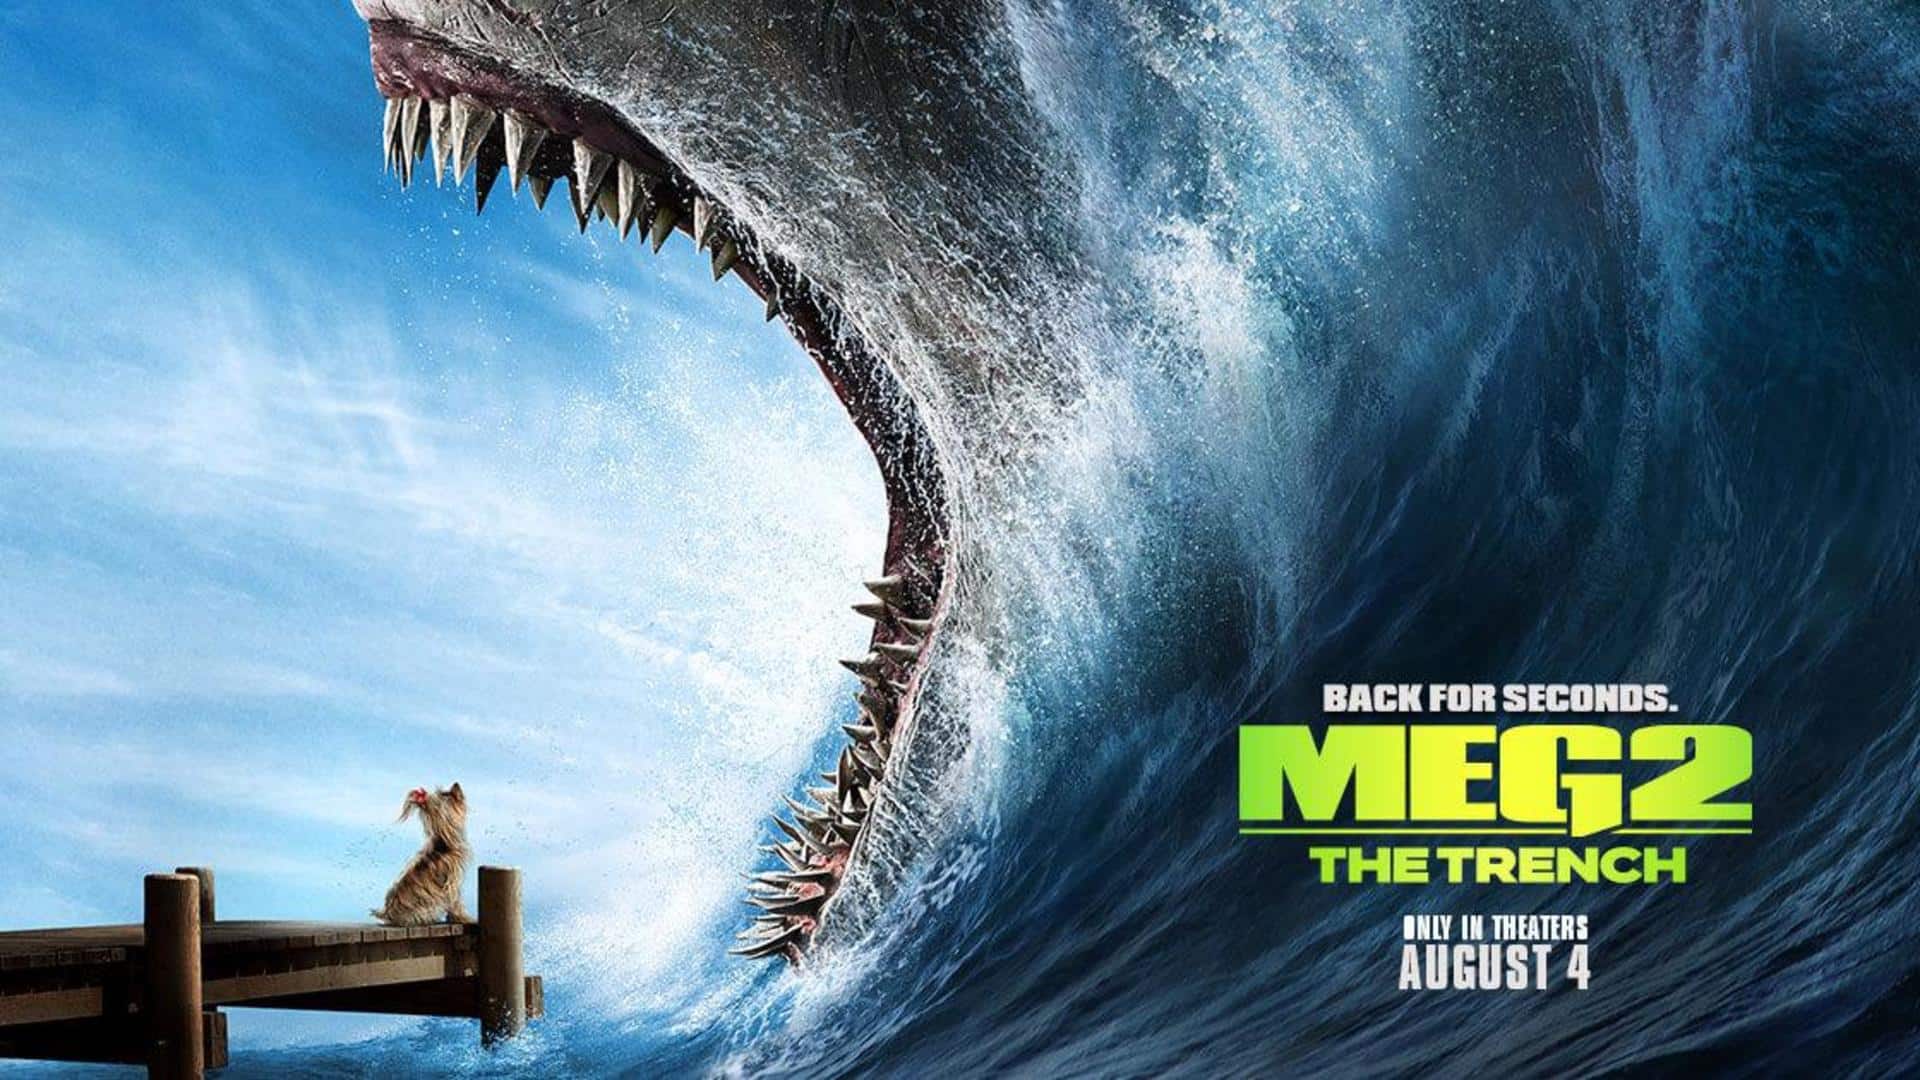 Cast, release date: Know everything about 'Meg 2: The Trench'